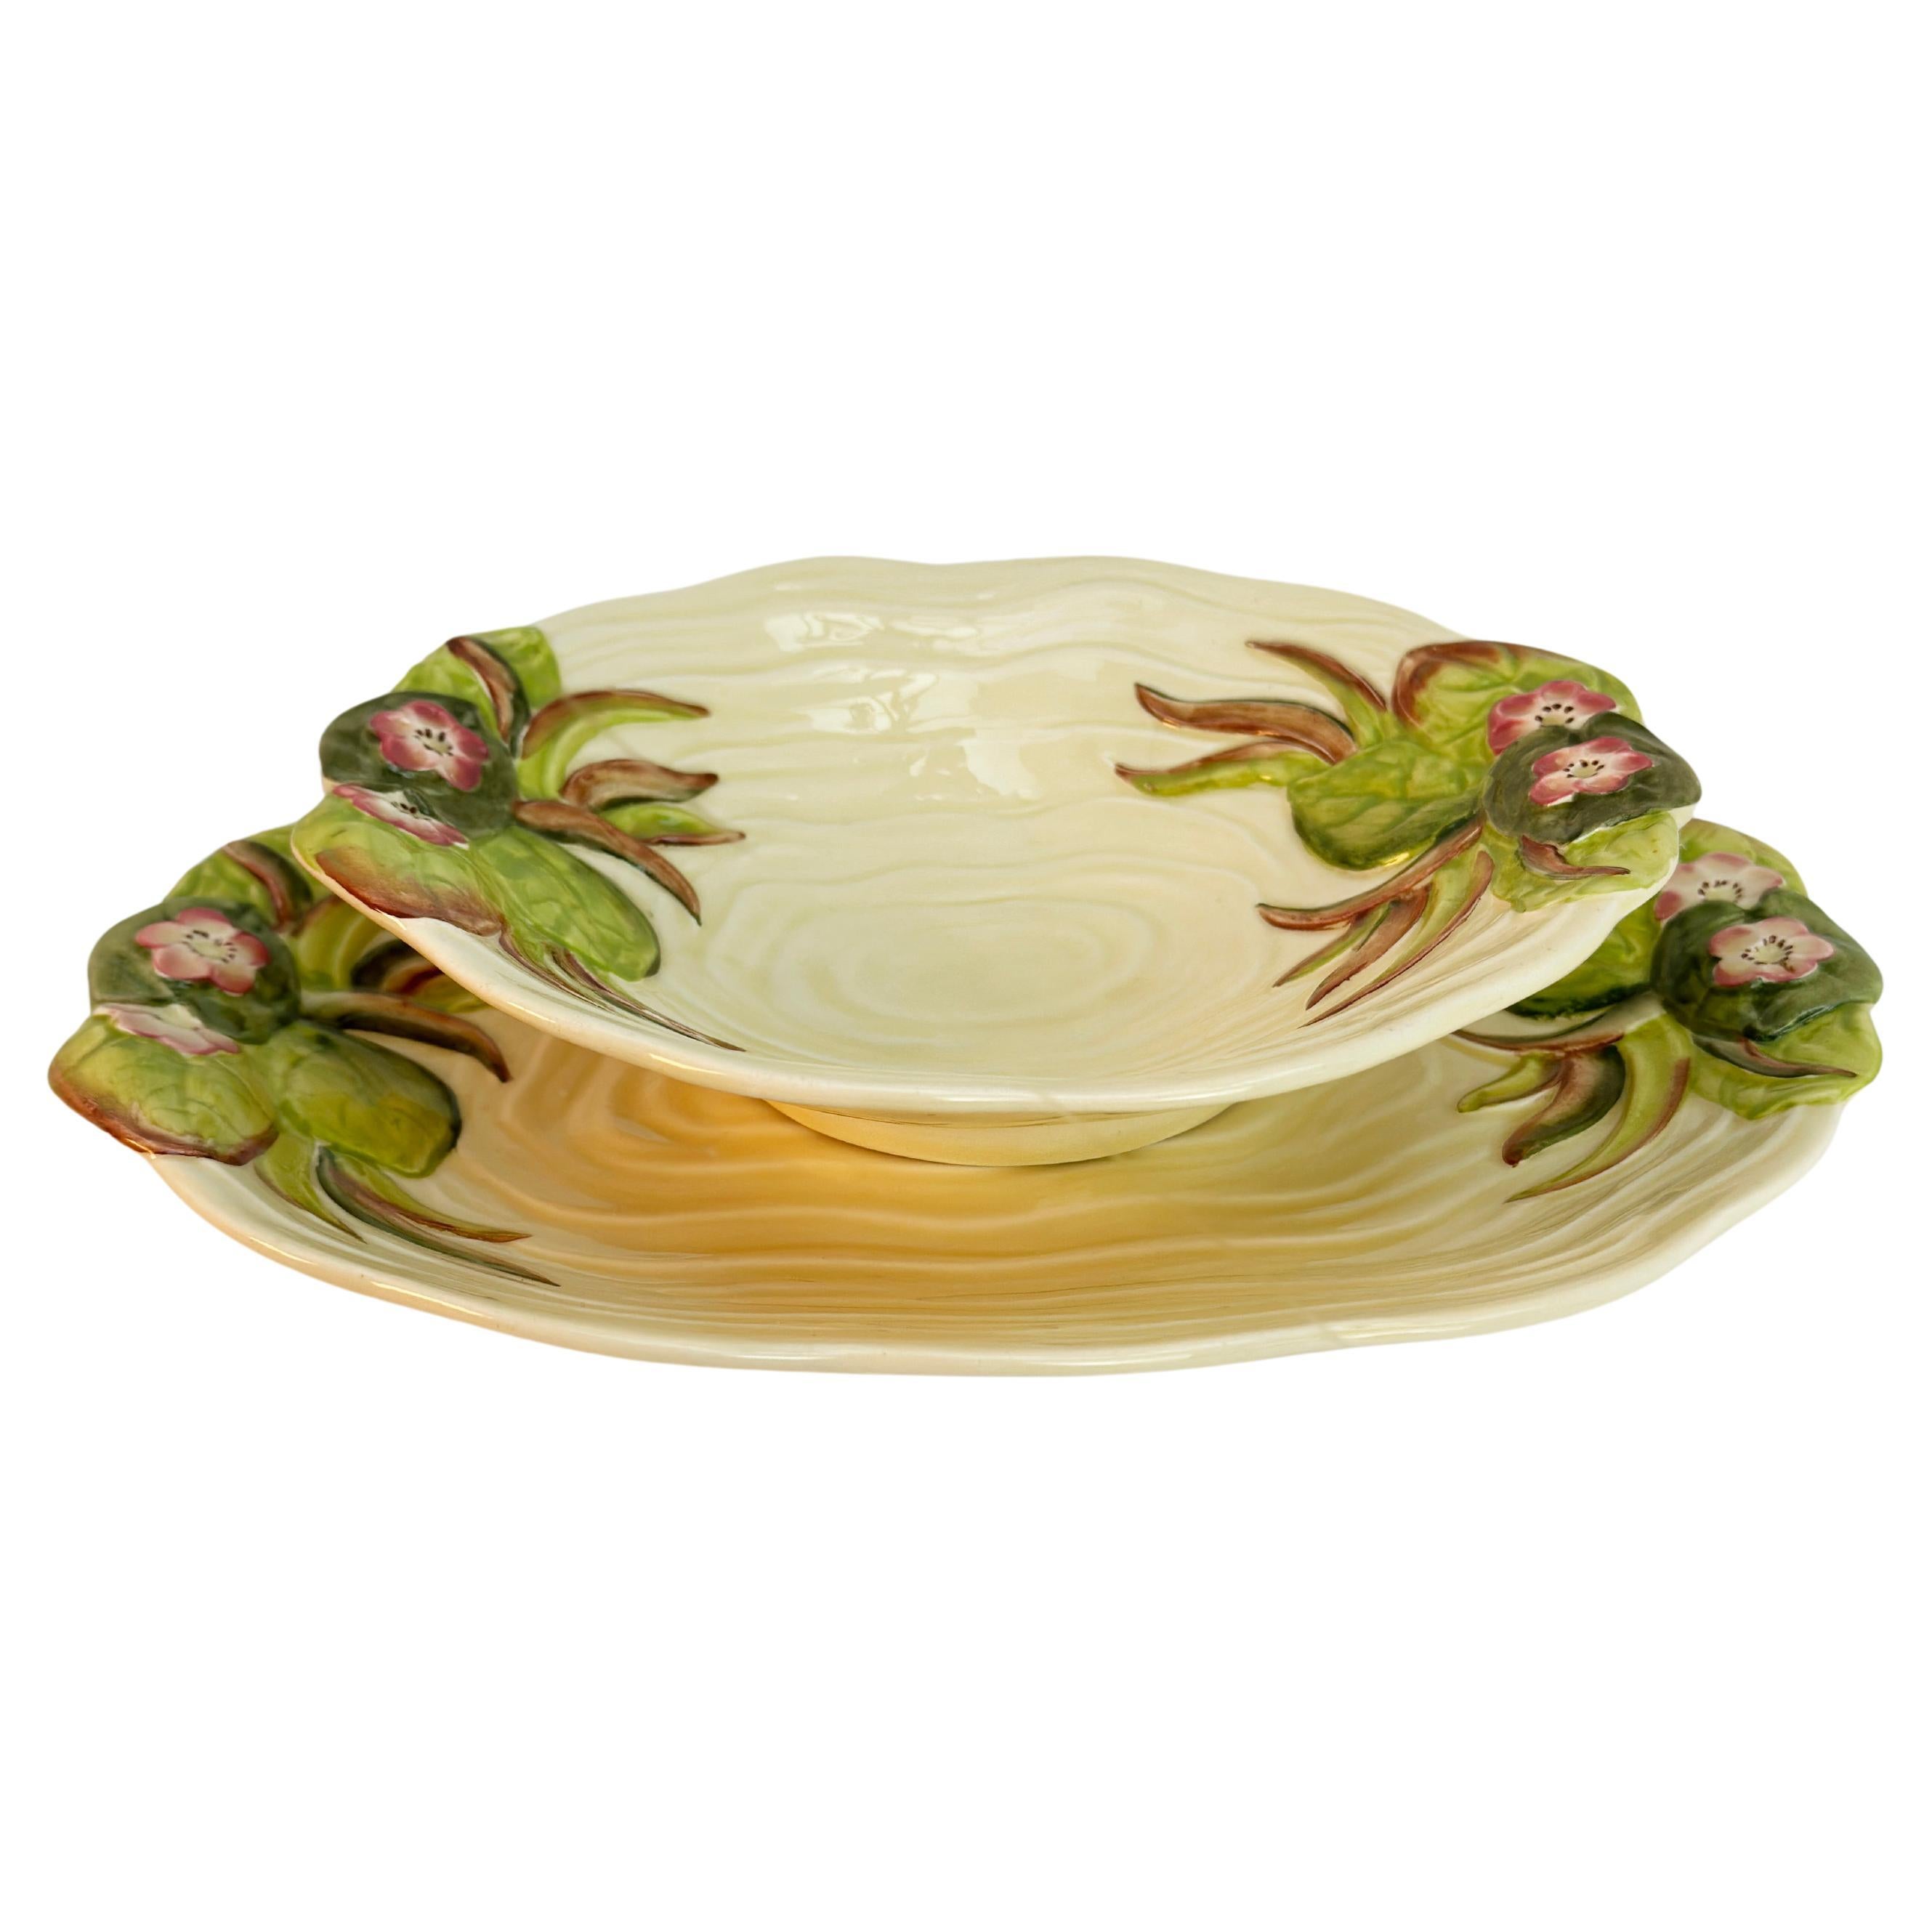 Clarice Cliff Water Lily Porcelain Dish and Platter Newport Pottery  For Sale